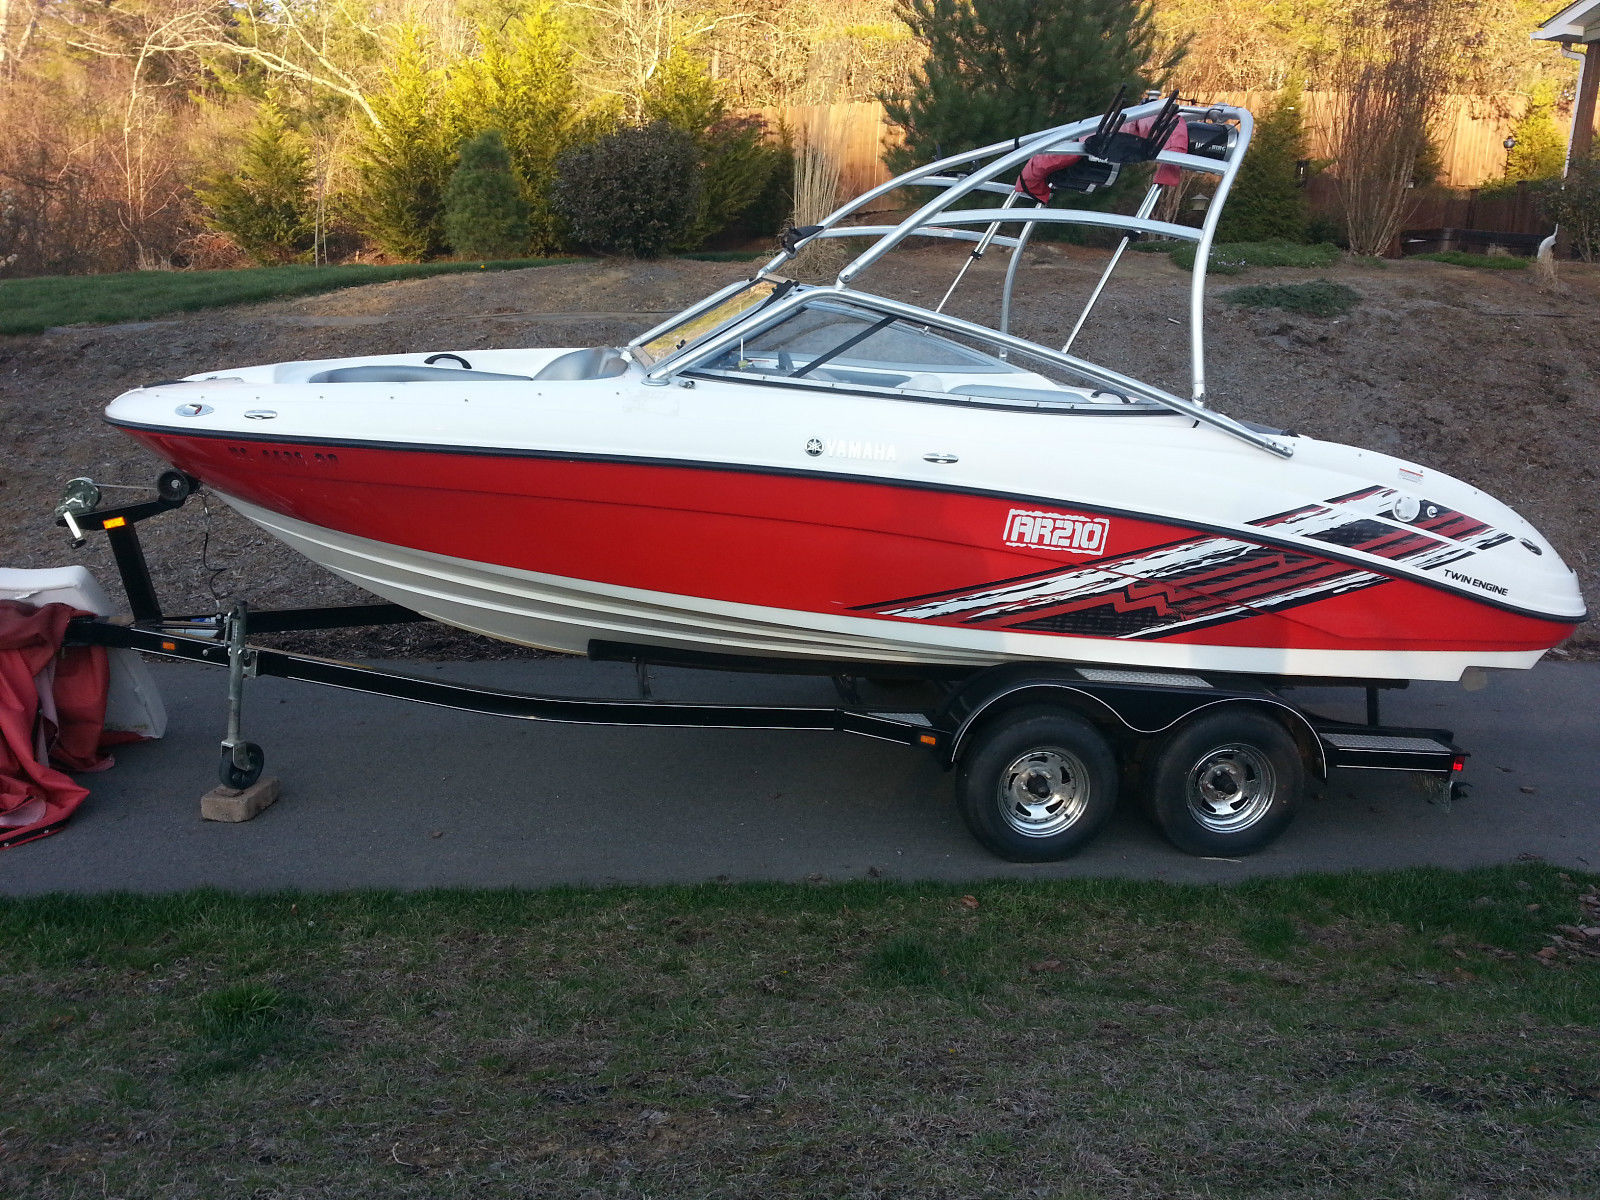 1994 sea ray laguna 21 .this is a must sell as my new boat arrived today.